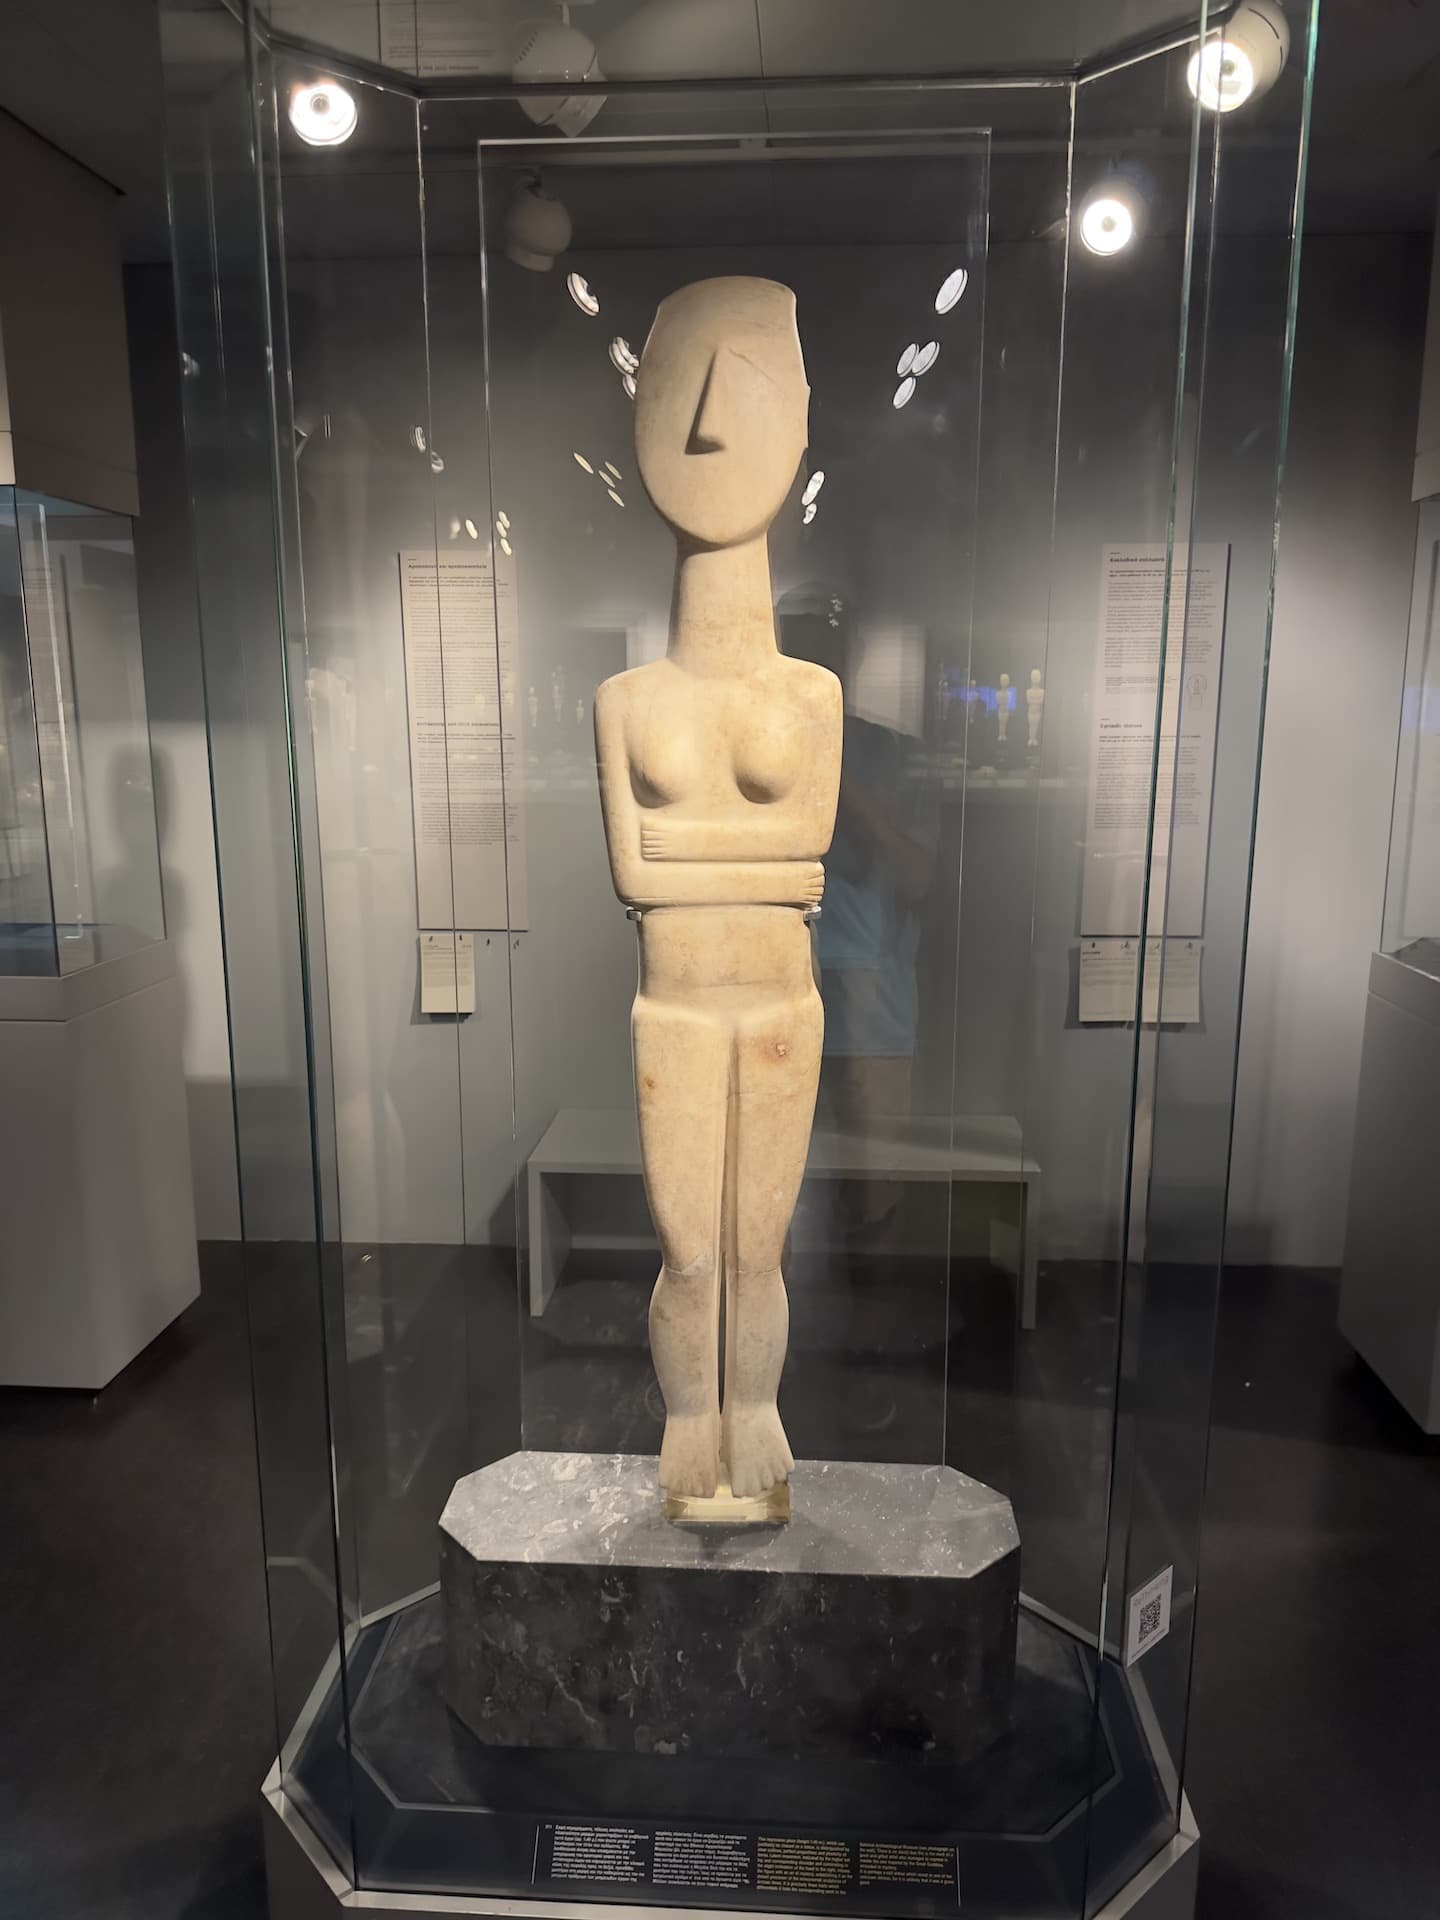 Large female figure in Cycladic Culture in Ancient Greek Art at the Museum of Cycladic Art in Athens, Greece